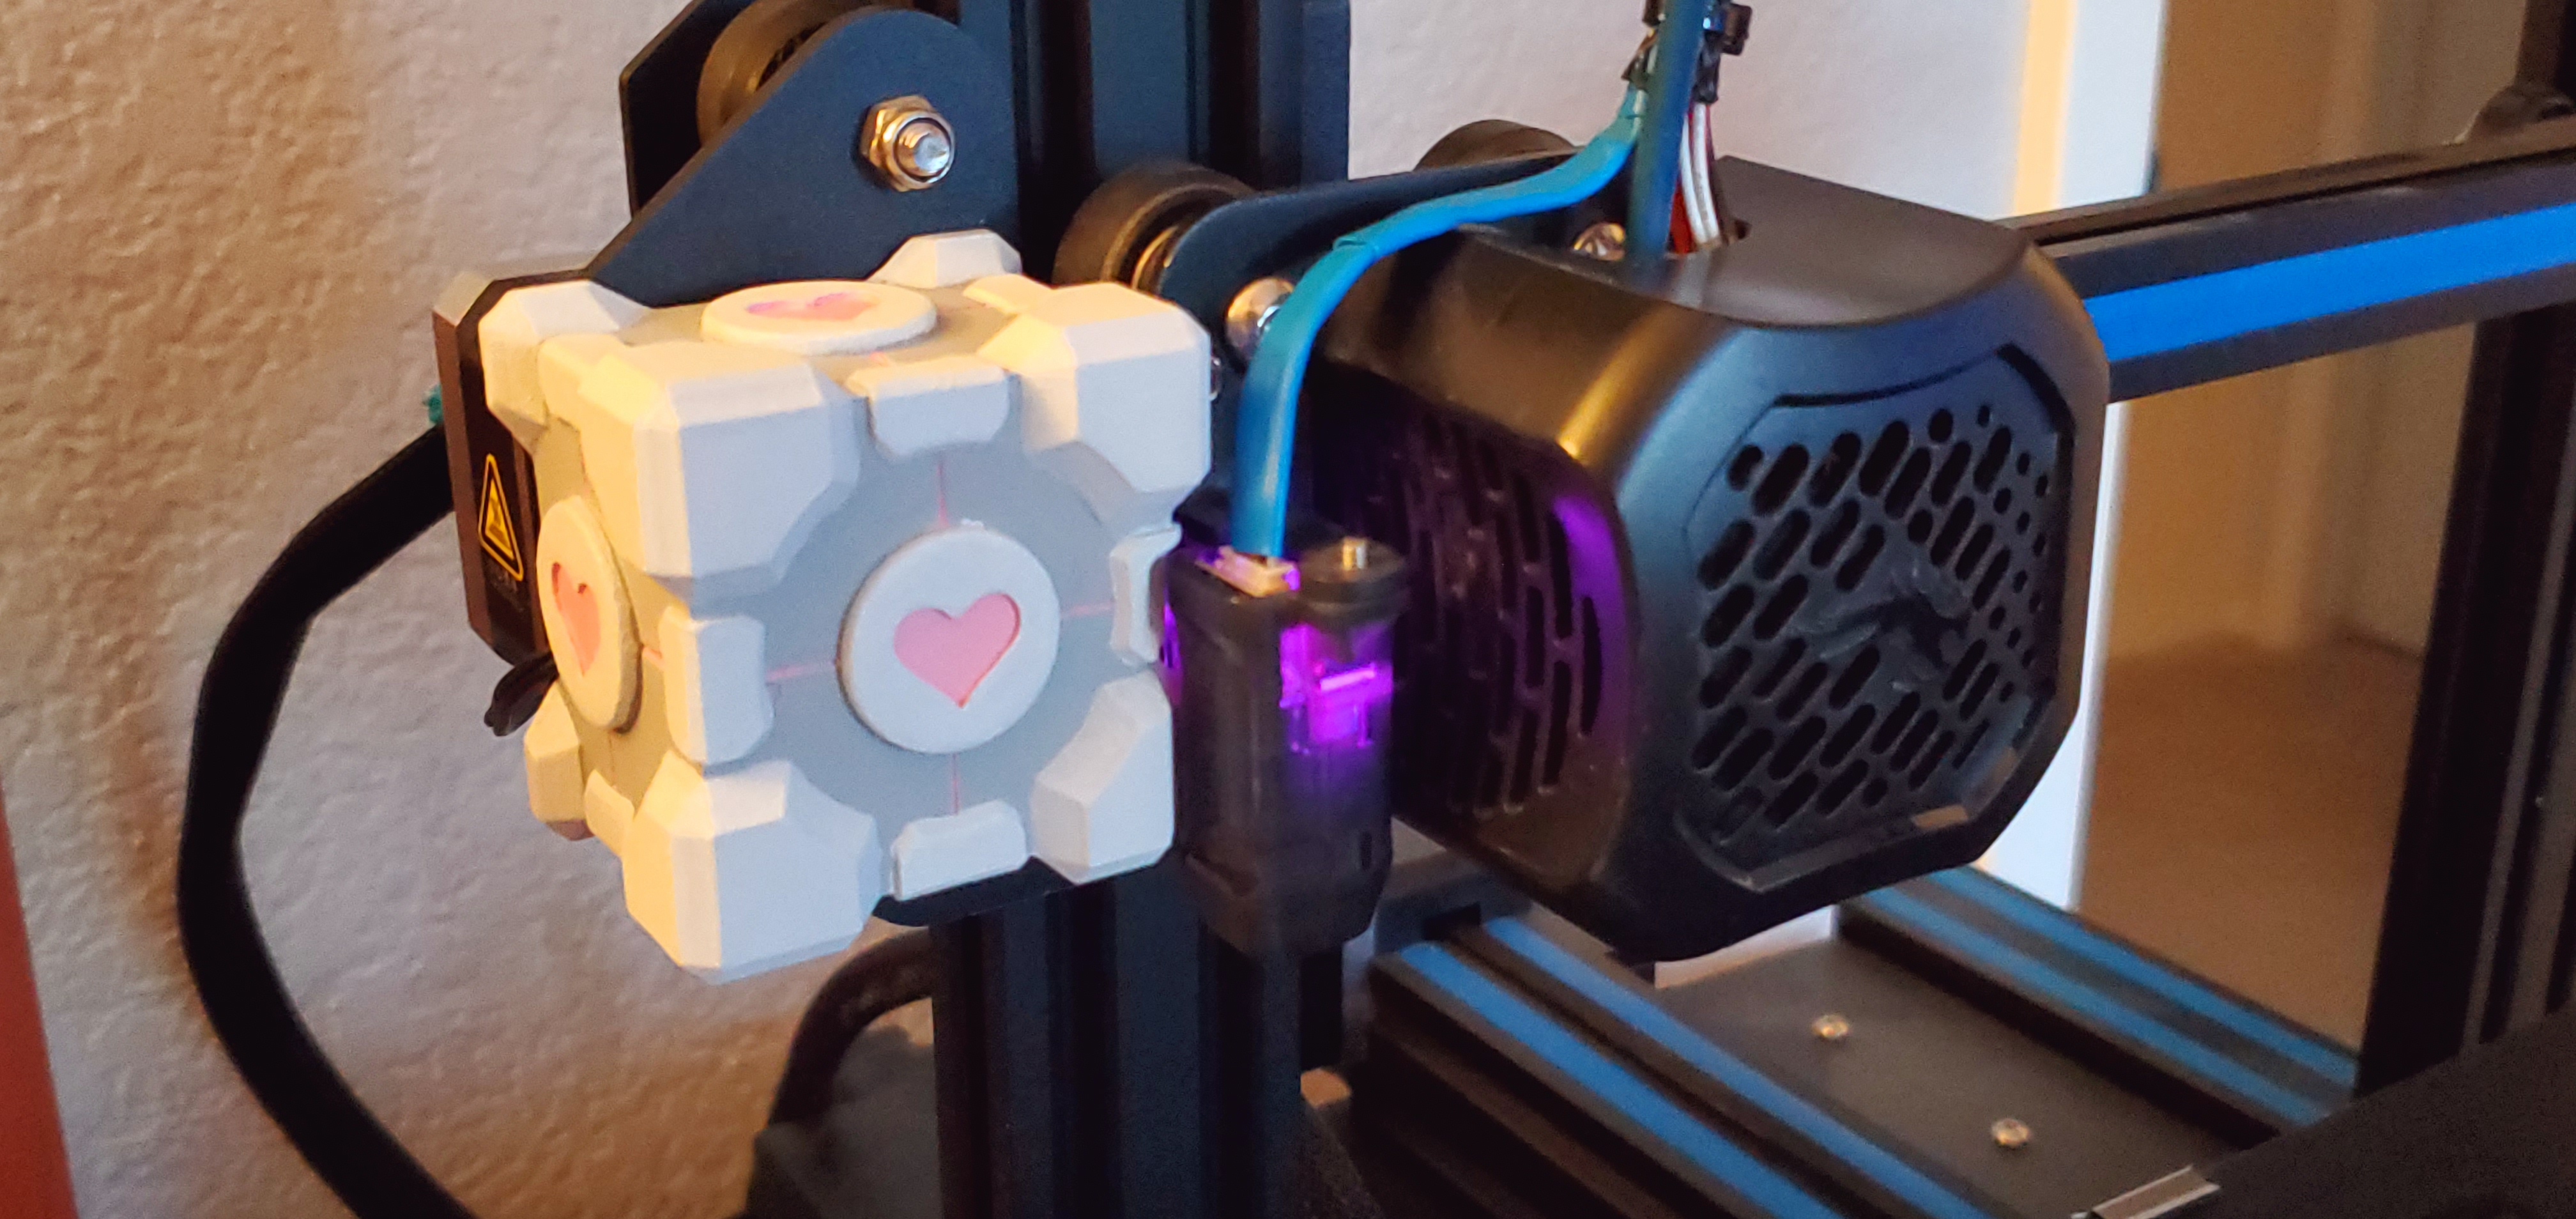 Ender 3 v2 Companion Cube X Motor Cover (CR-Touch Compatible)